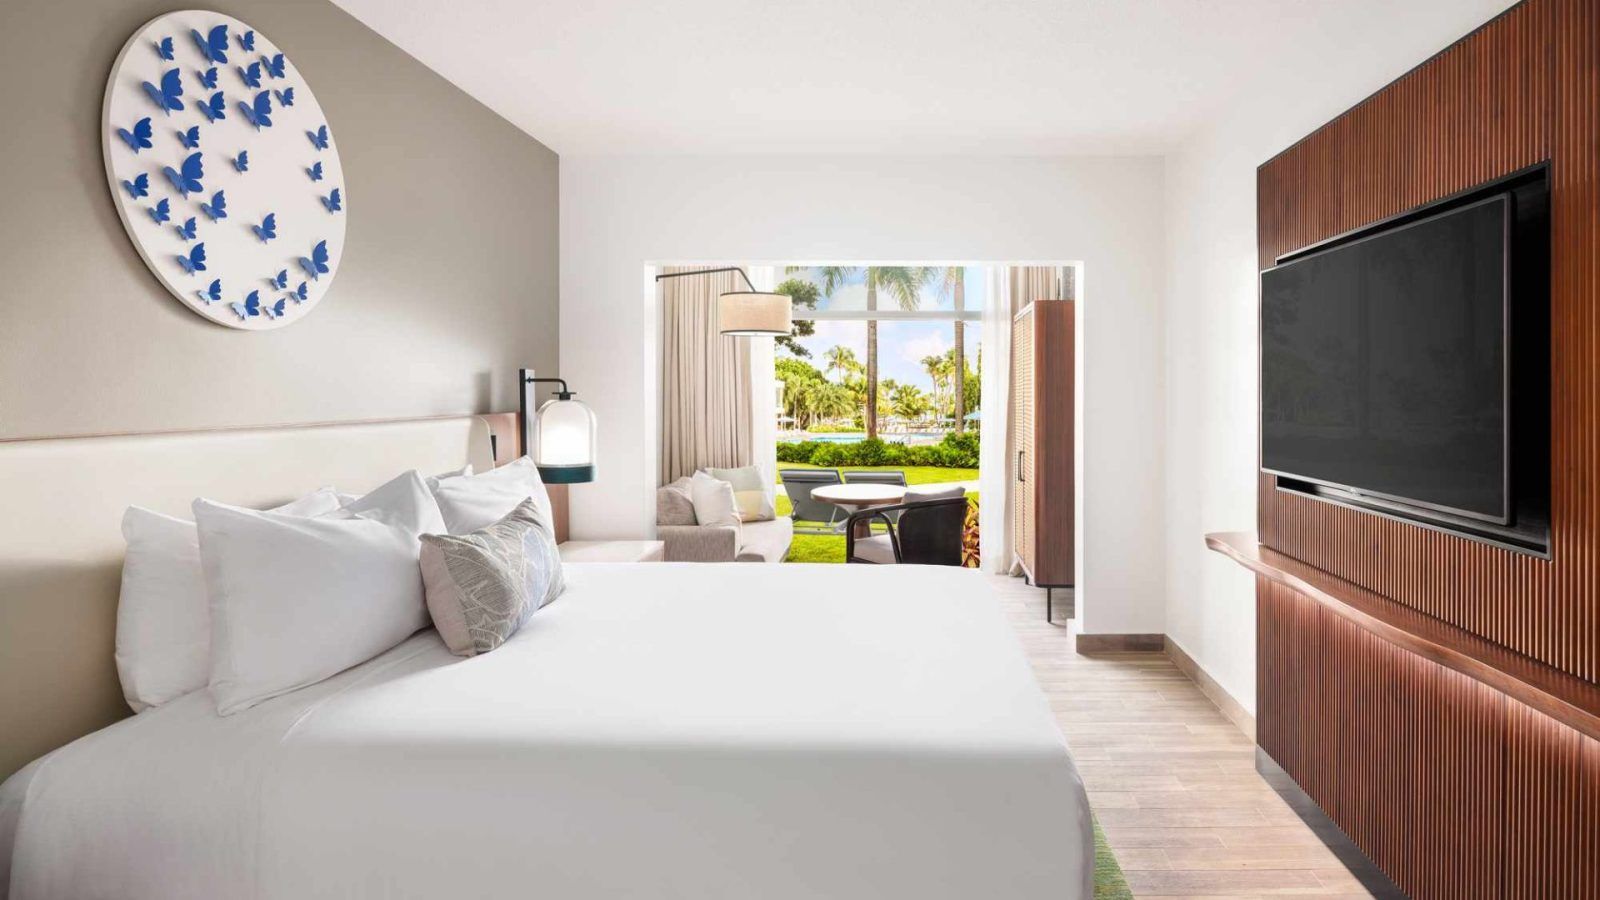 This Luxury Hotel In Puerto Rico Just Unveiled Its Gorgeous New